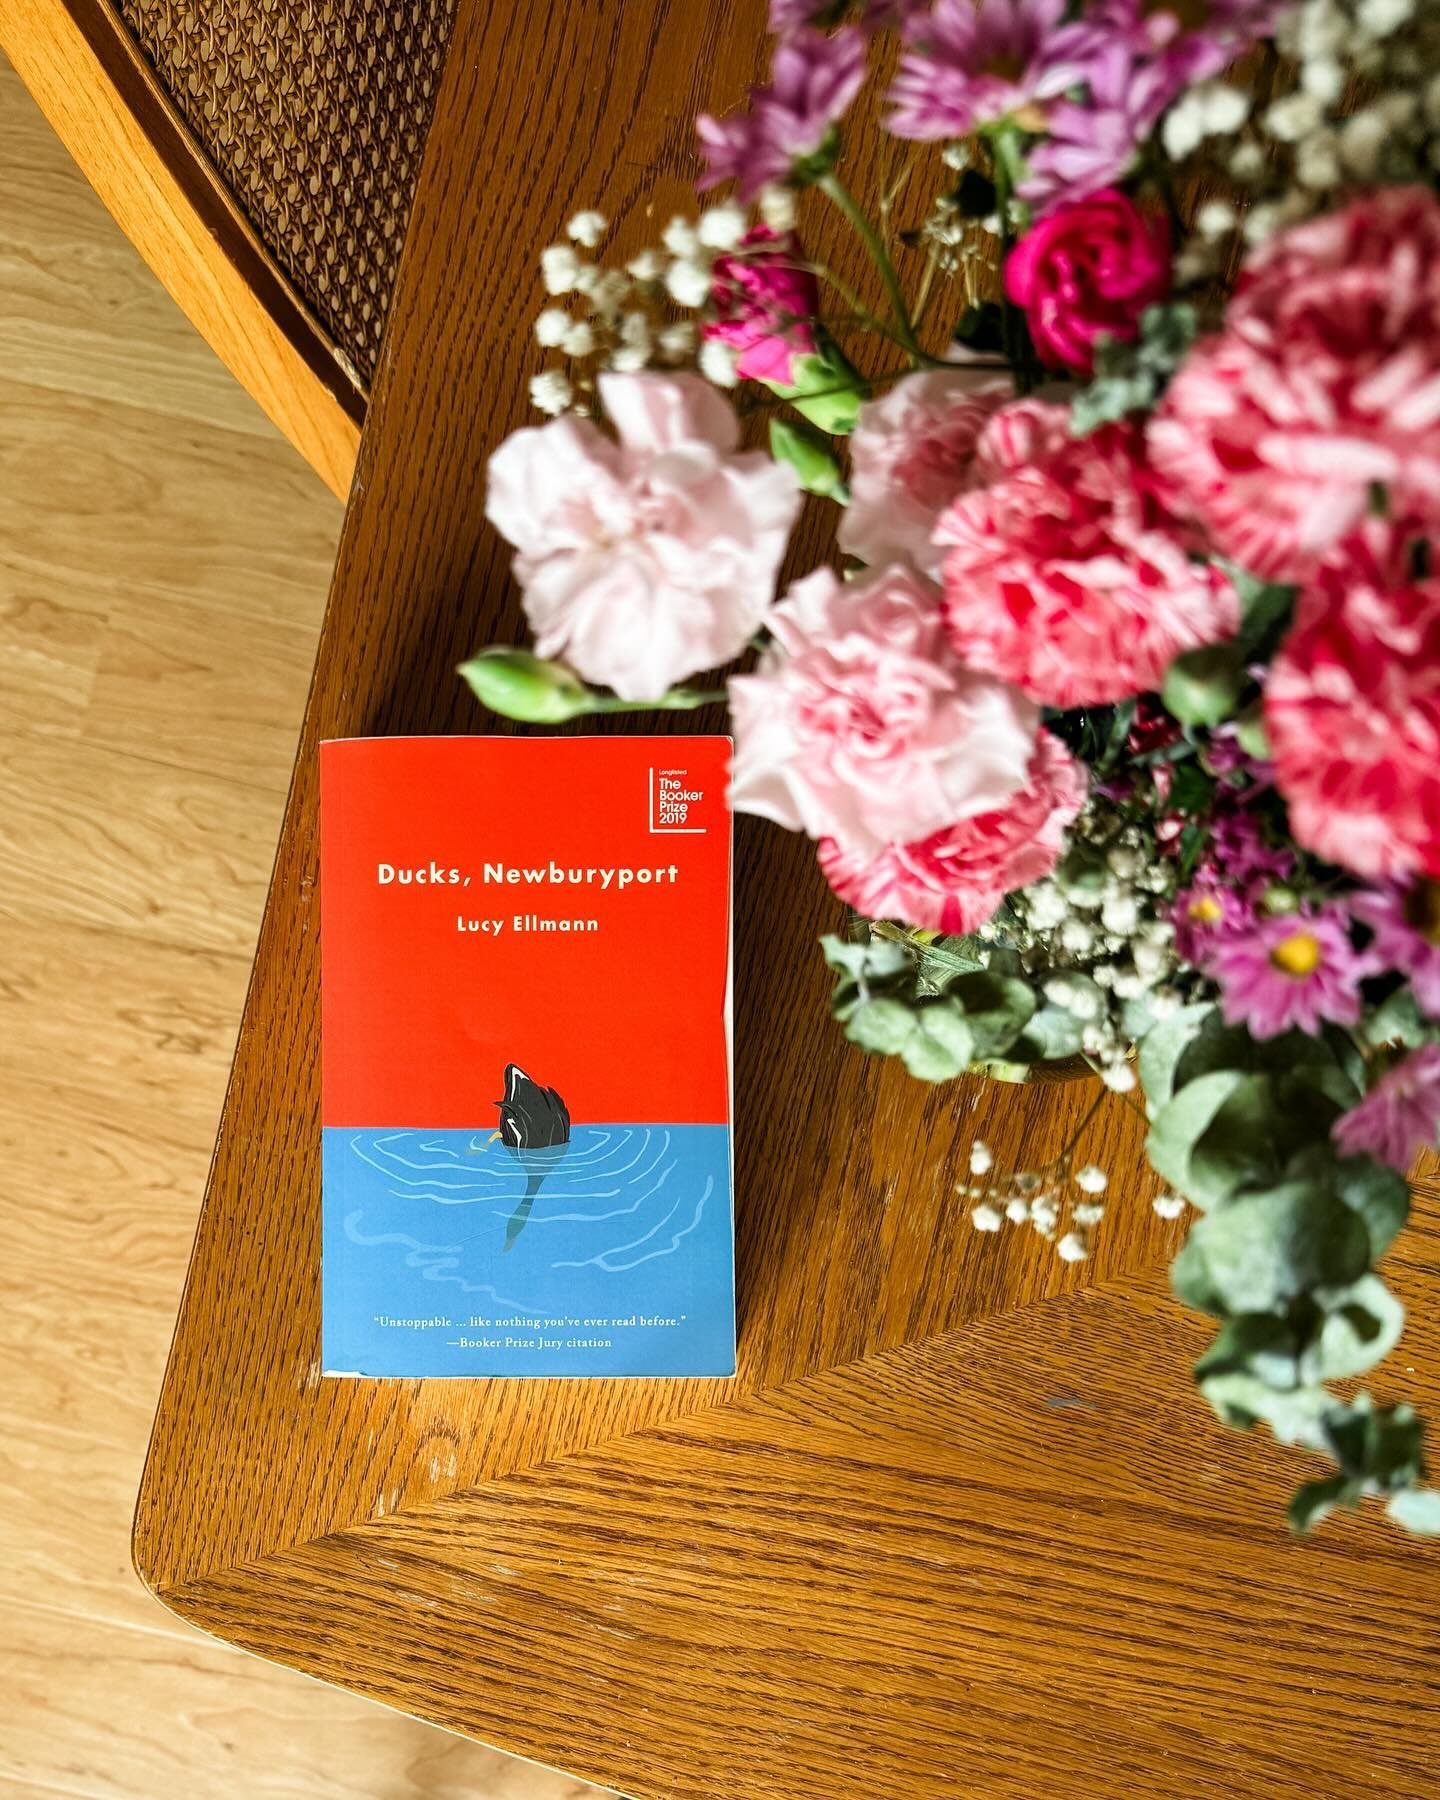 🦆 DUCKS GIVEAWAY 🦆
⠀⠀⠀⠀⠀⠀⠀⠀⠀
Hey friends &mdash; in honor of Mother&rsquo;s Day, I&rsquo;ve partnered up with one of my favorite indie presses, @biblioasis_books, to give away a copy of one of my favorite books about motherhood (among many other th